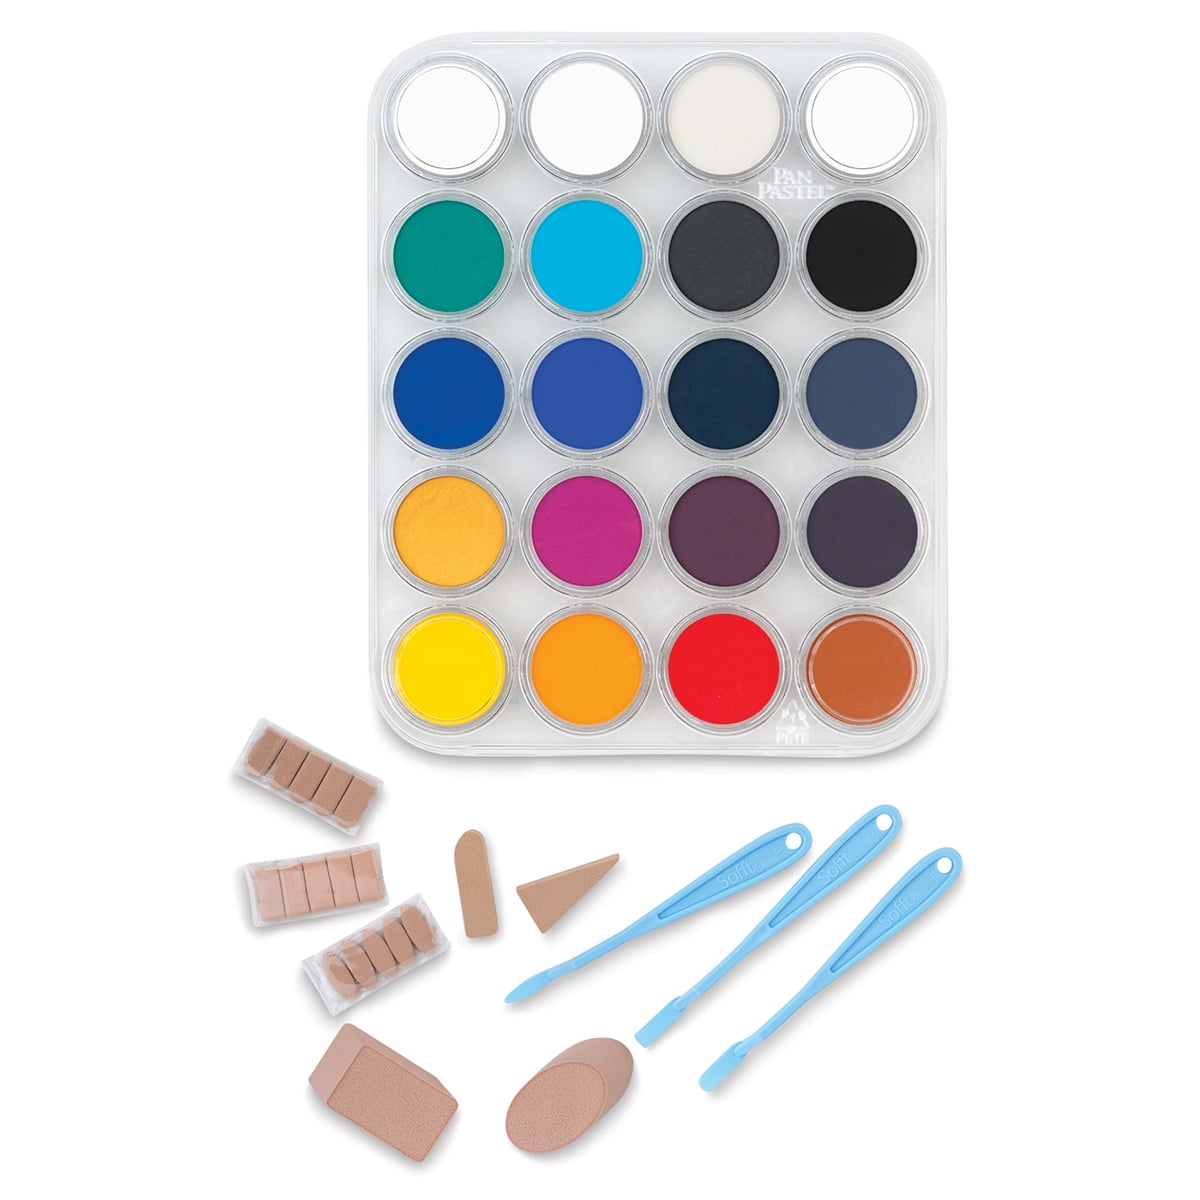 Panpastel Colorfin, Artists Pastels, 20-Color Joanne Barby General Painting Set (30251)